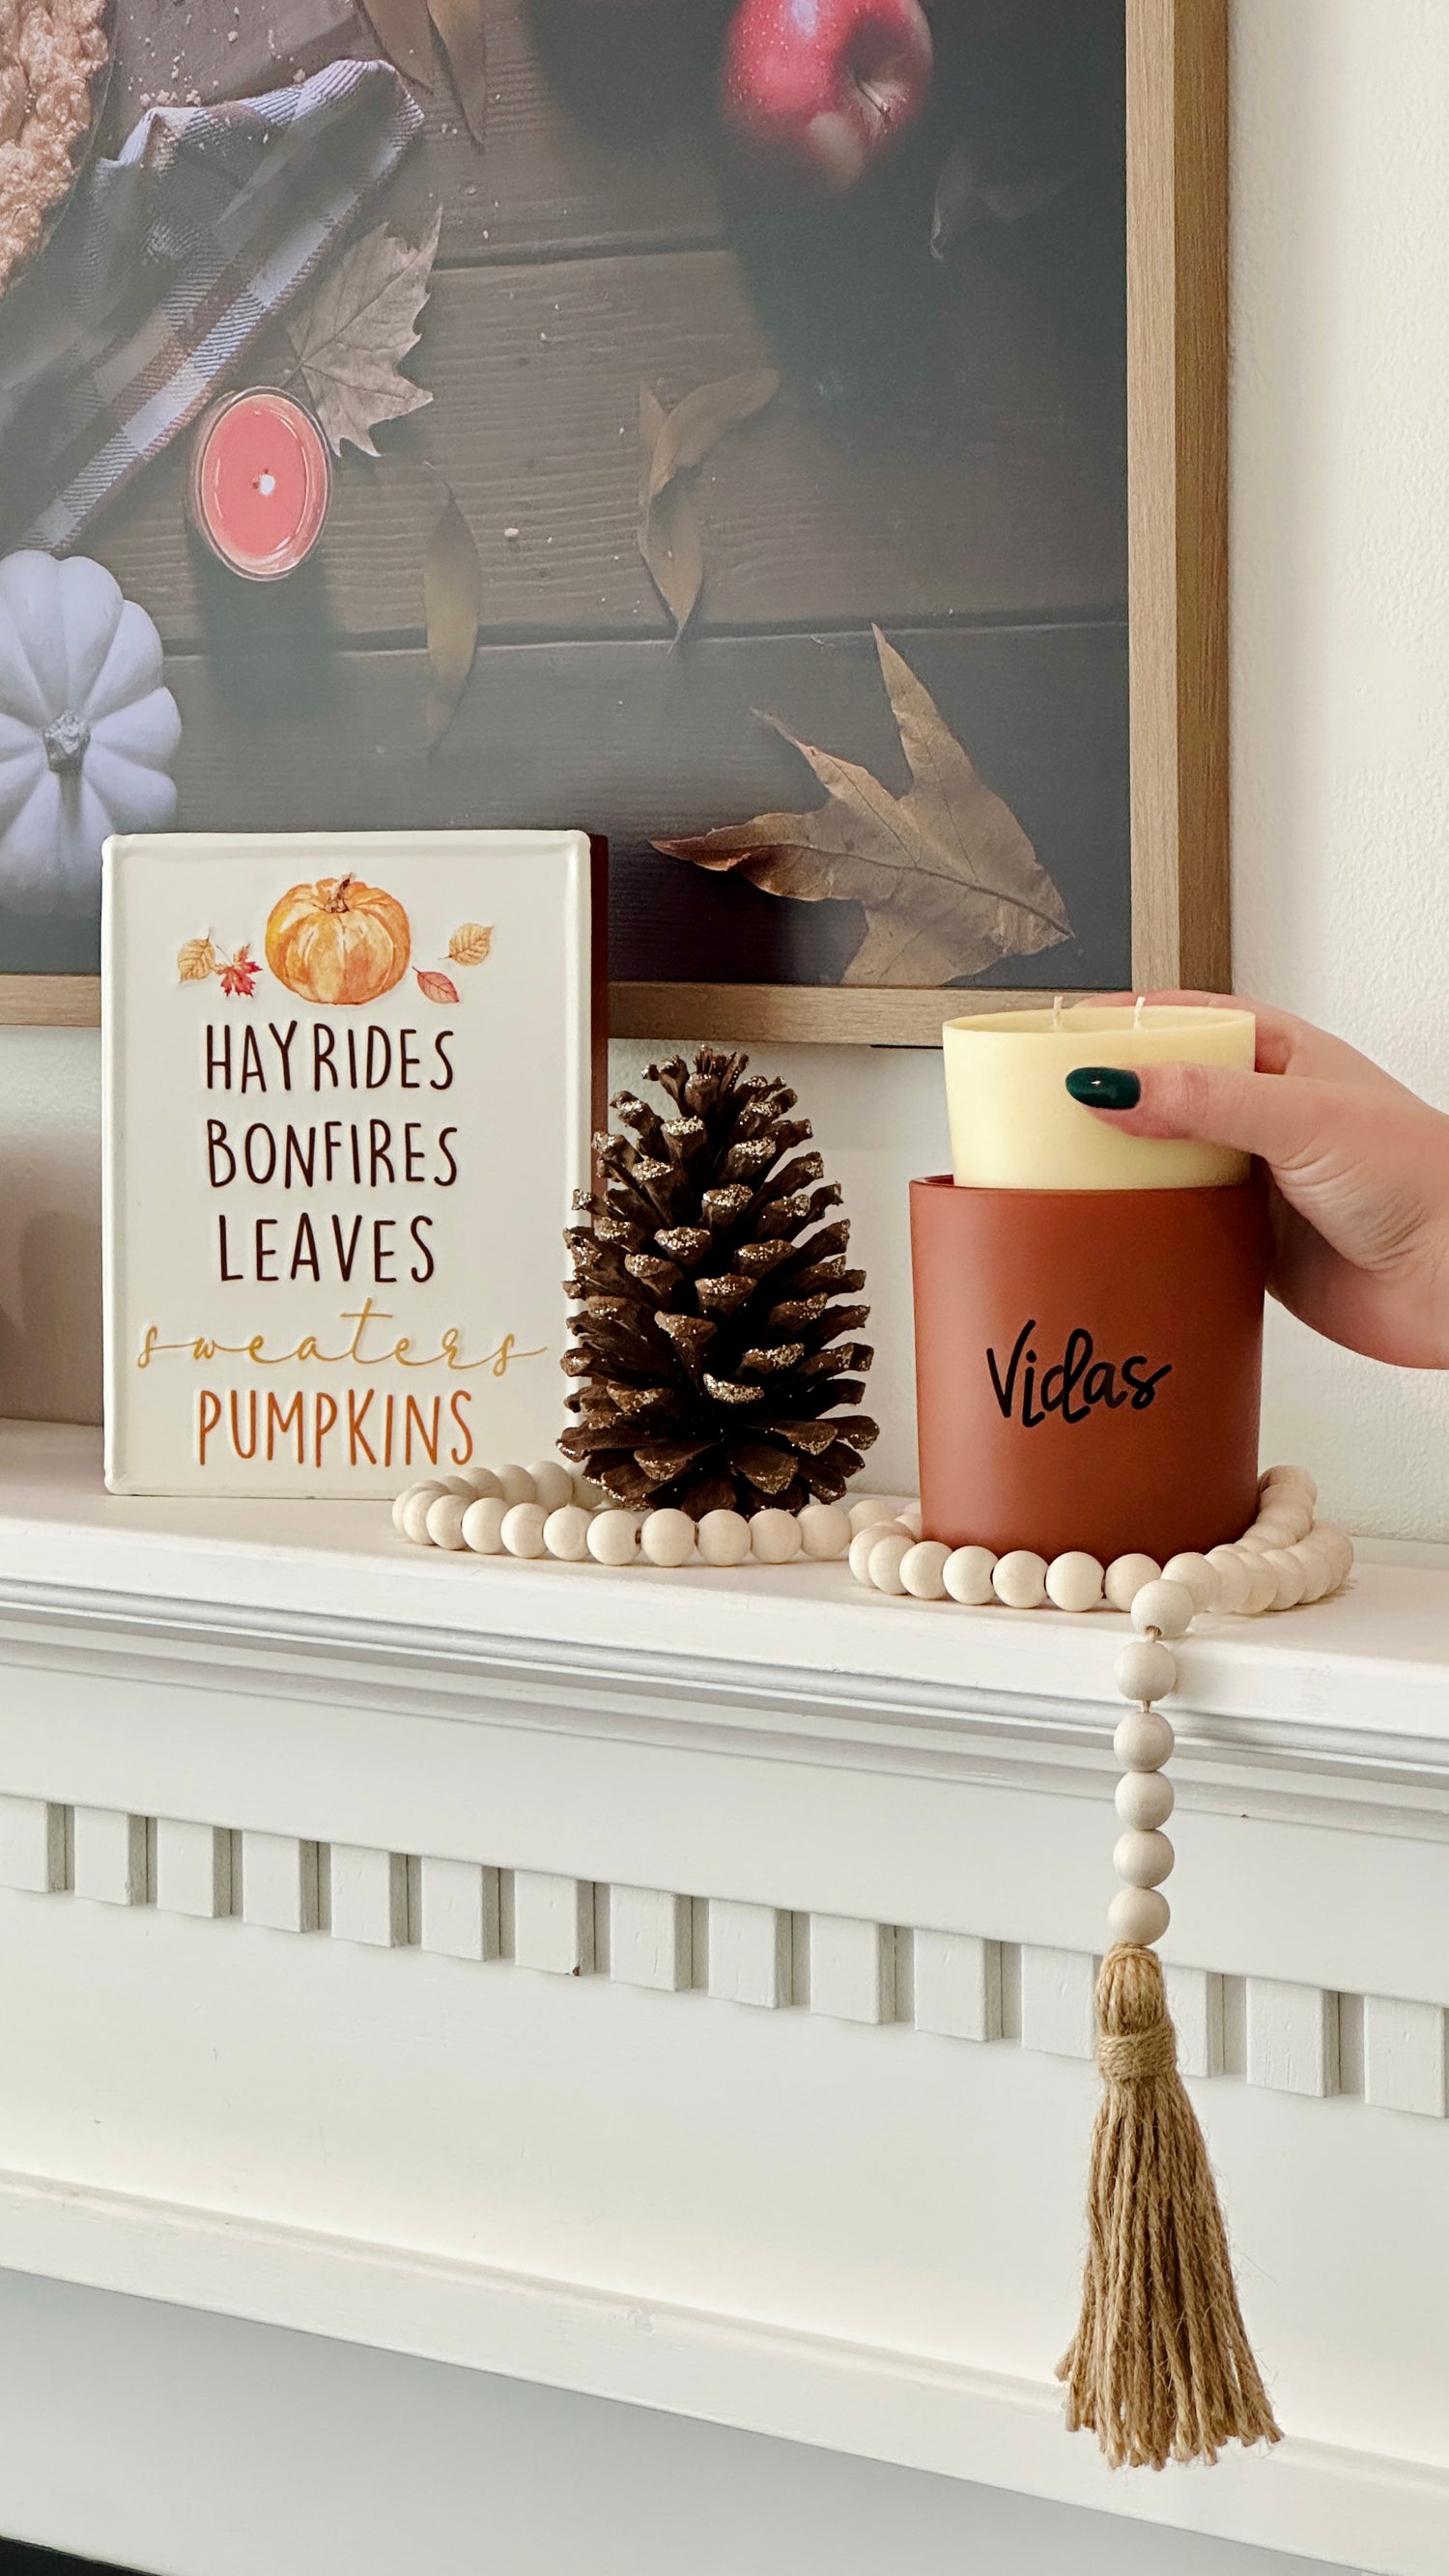 Fall elegance adorns the mantle with a clay candle jar at its center, embraced by seasonal decor. A hand gracefully inserts a candle refill into the jar, combining style and sustainability in a harmonious autumn display.